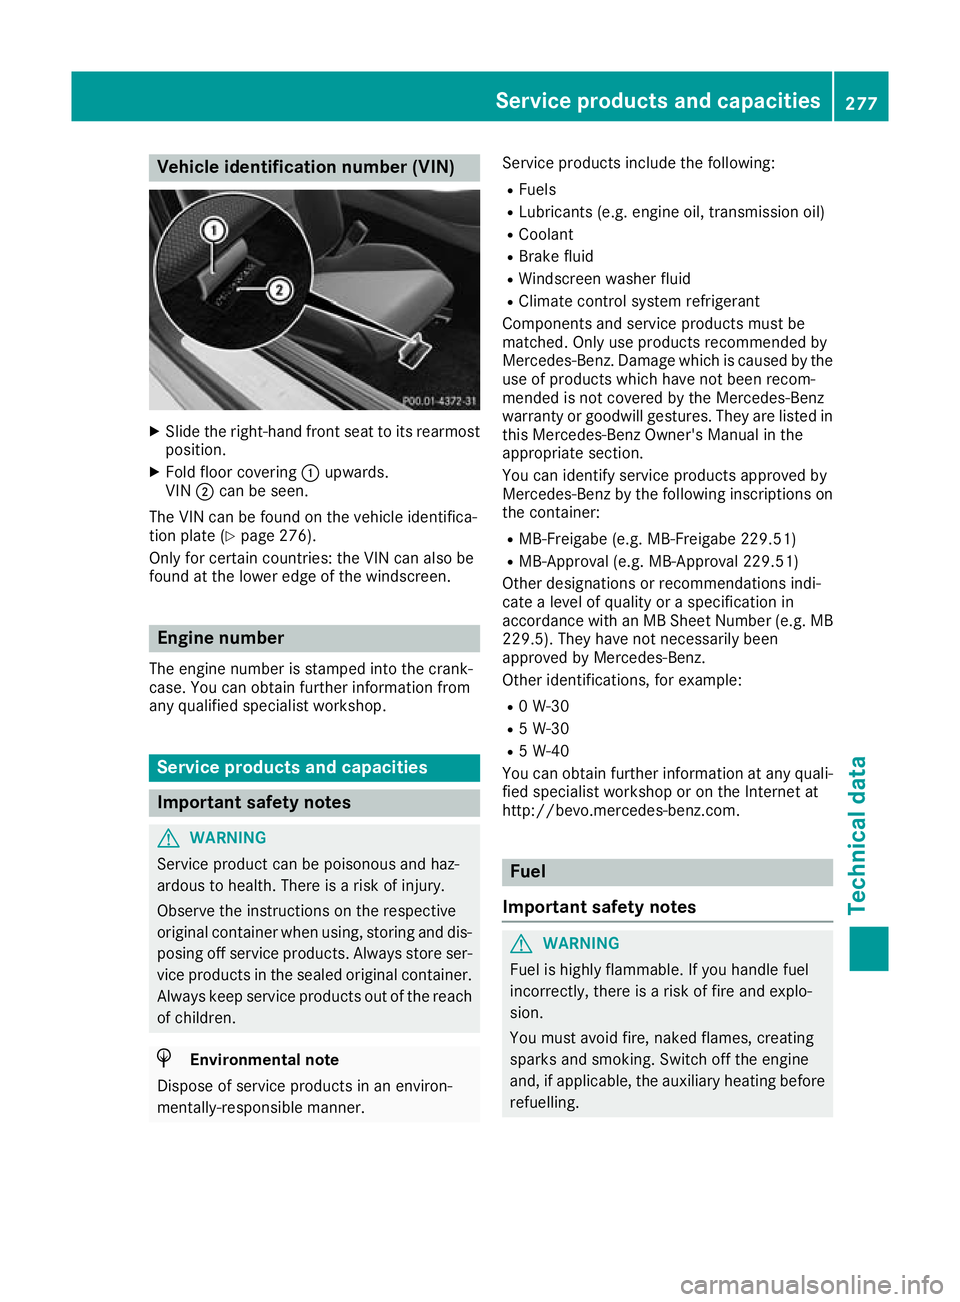 MERCEDES-BENZ AMG GT ROADSTER 2016  Owners Manual Vehicle identification number (VIN)
X
Slide the right-hand front seat to its rearmost
position.
X Fold floor covering :upwards.
VIN ;can be seen.
The VIN can be found on the vehicle identifica-
tion p